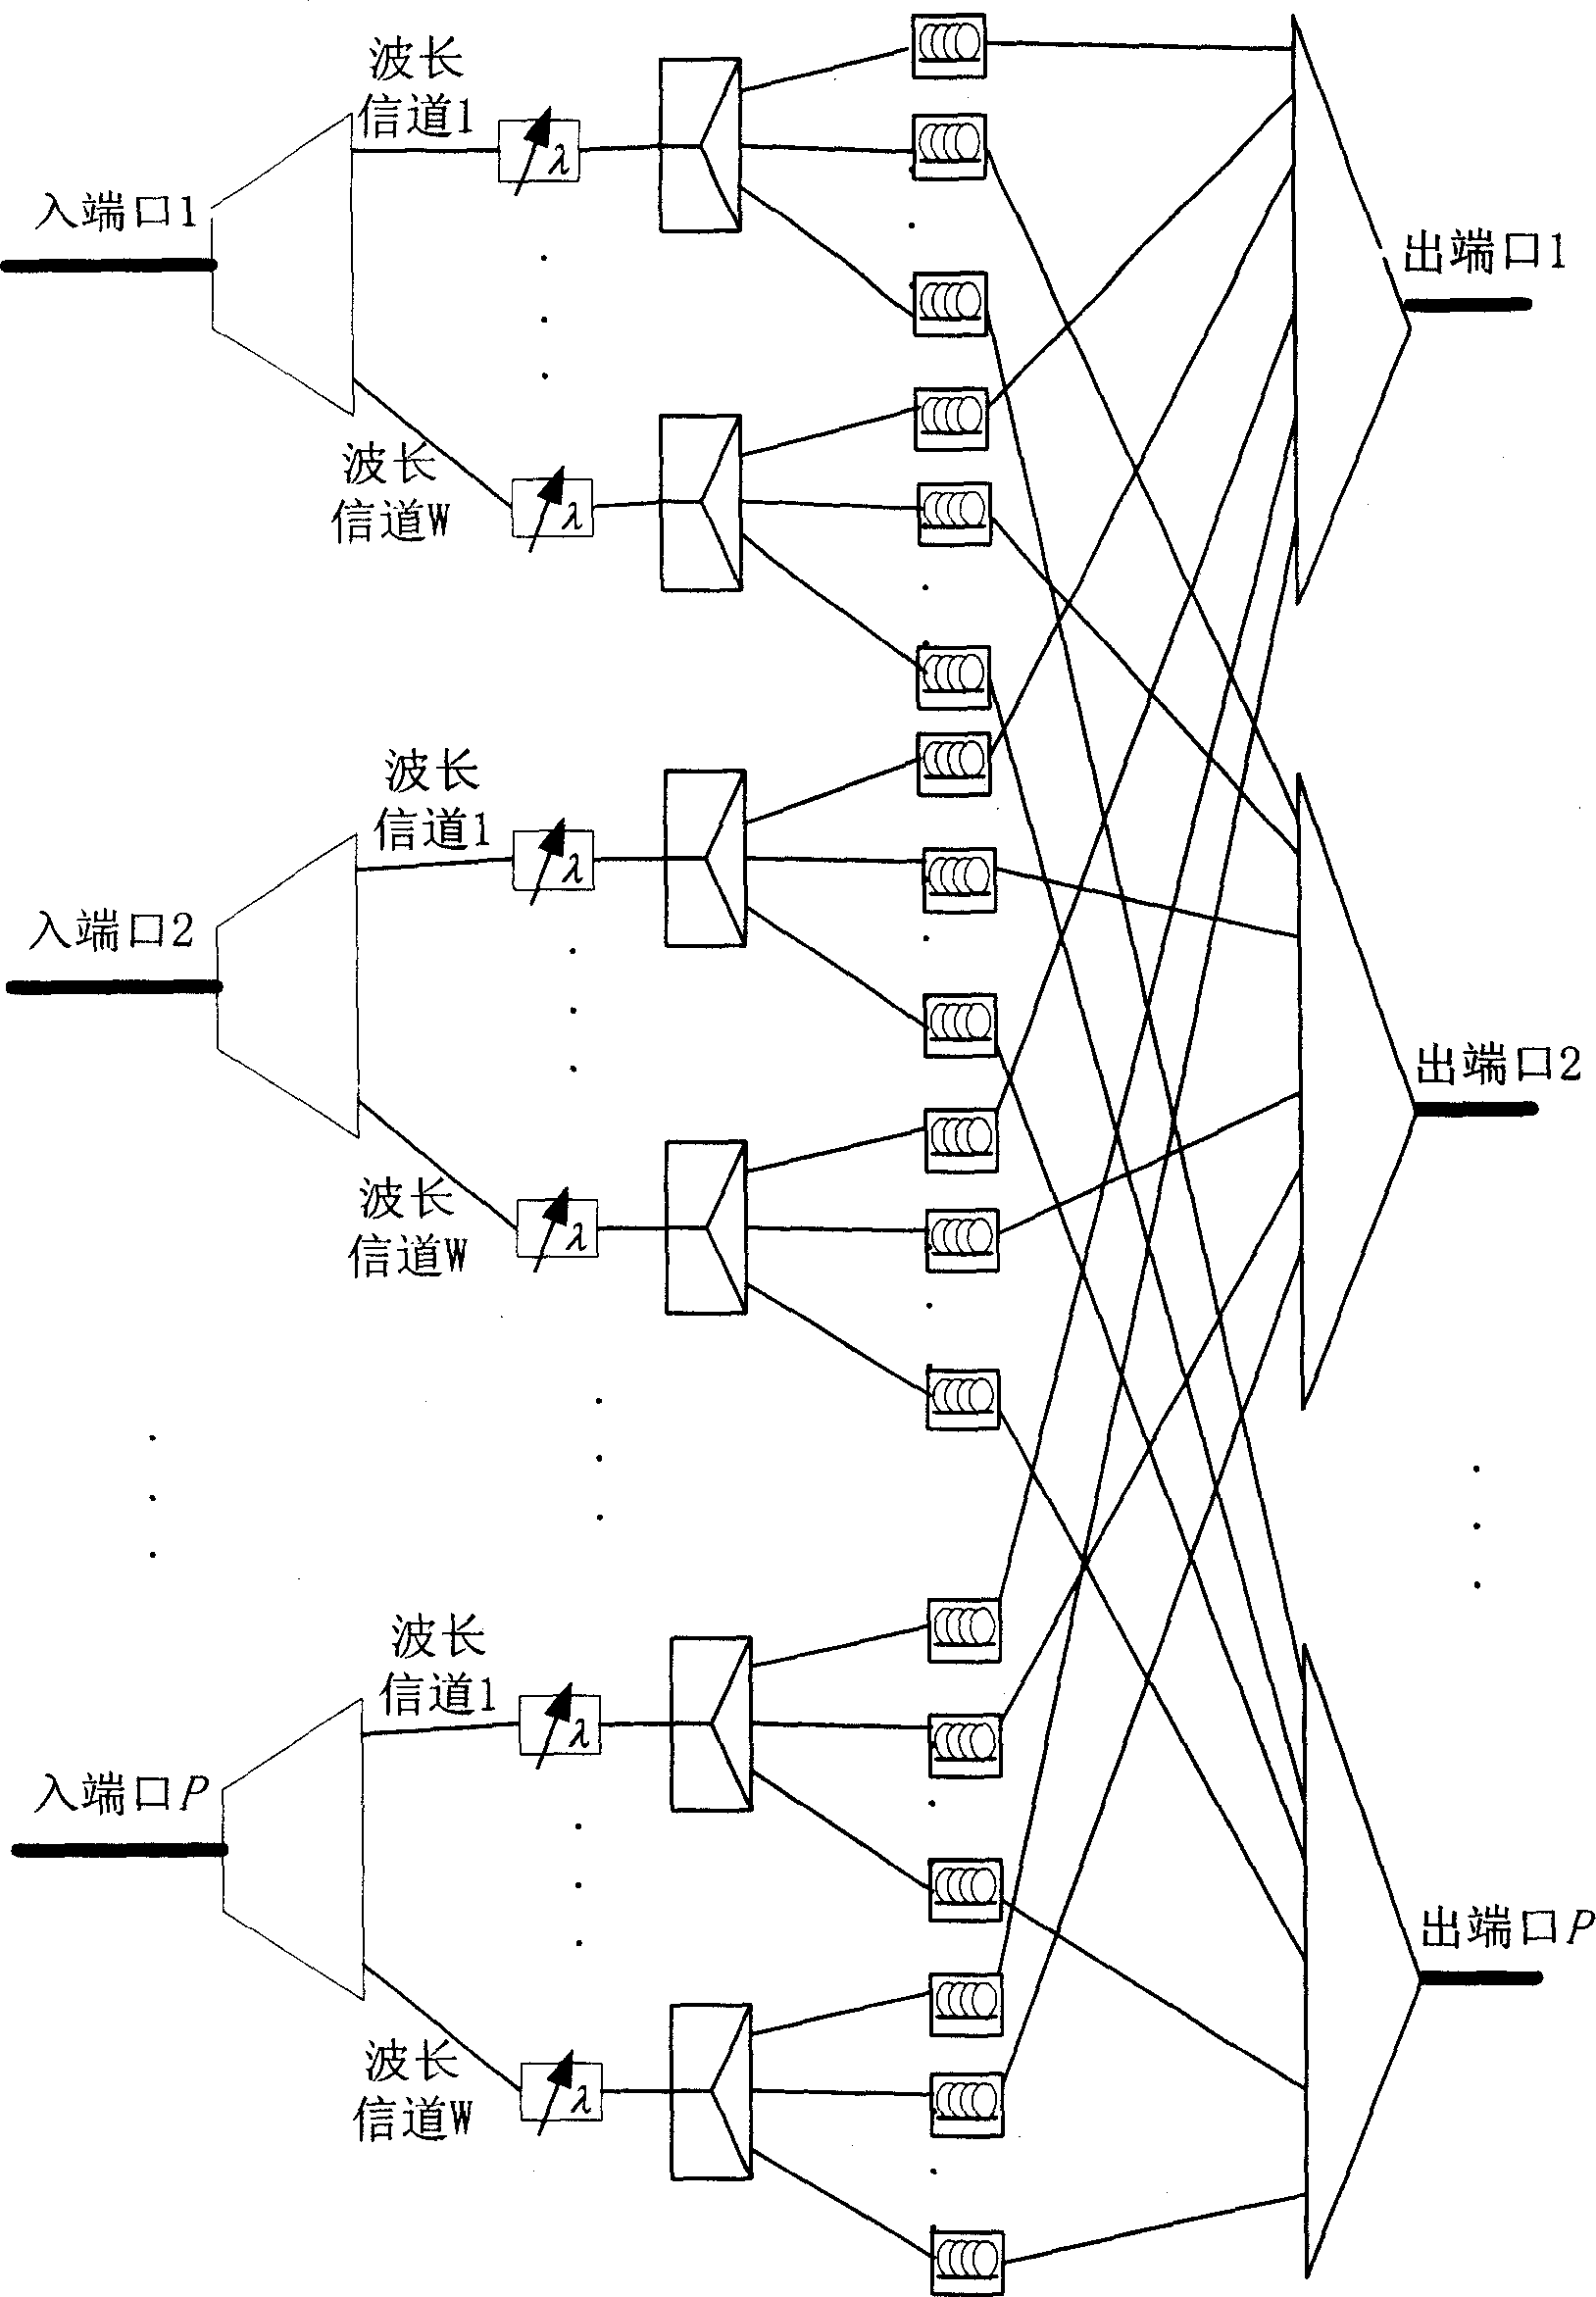 Light burst/grouping switching structure without team head block